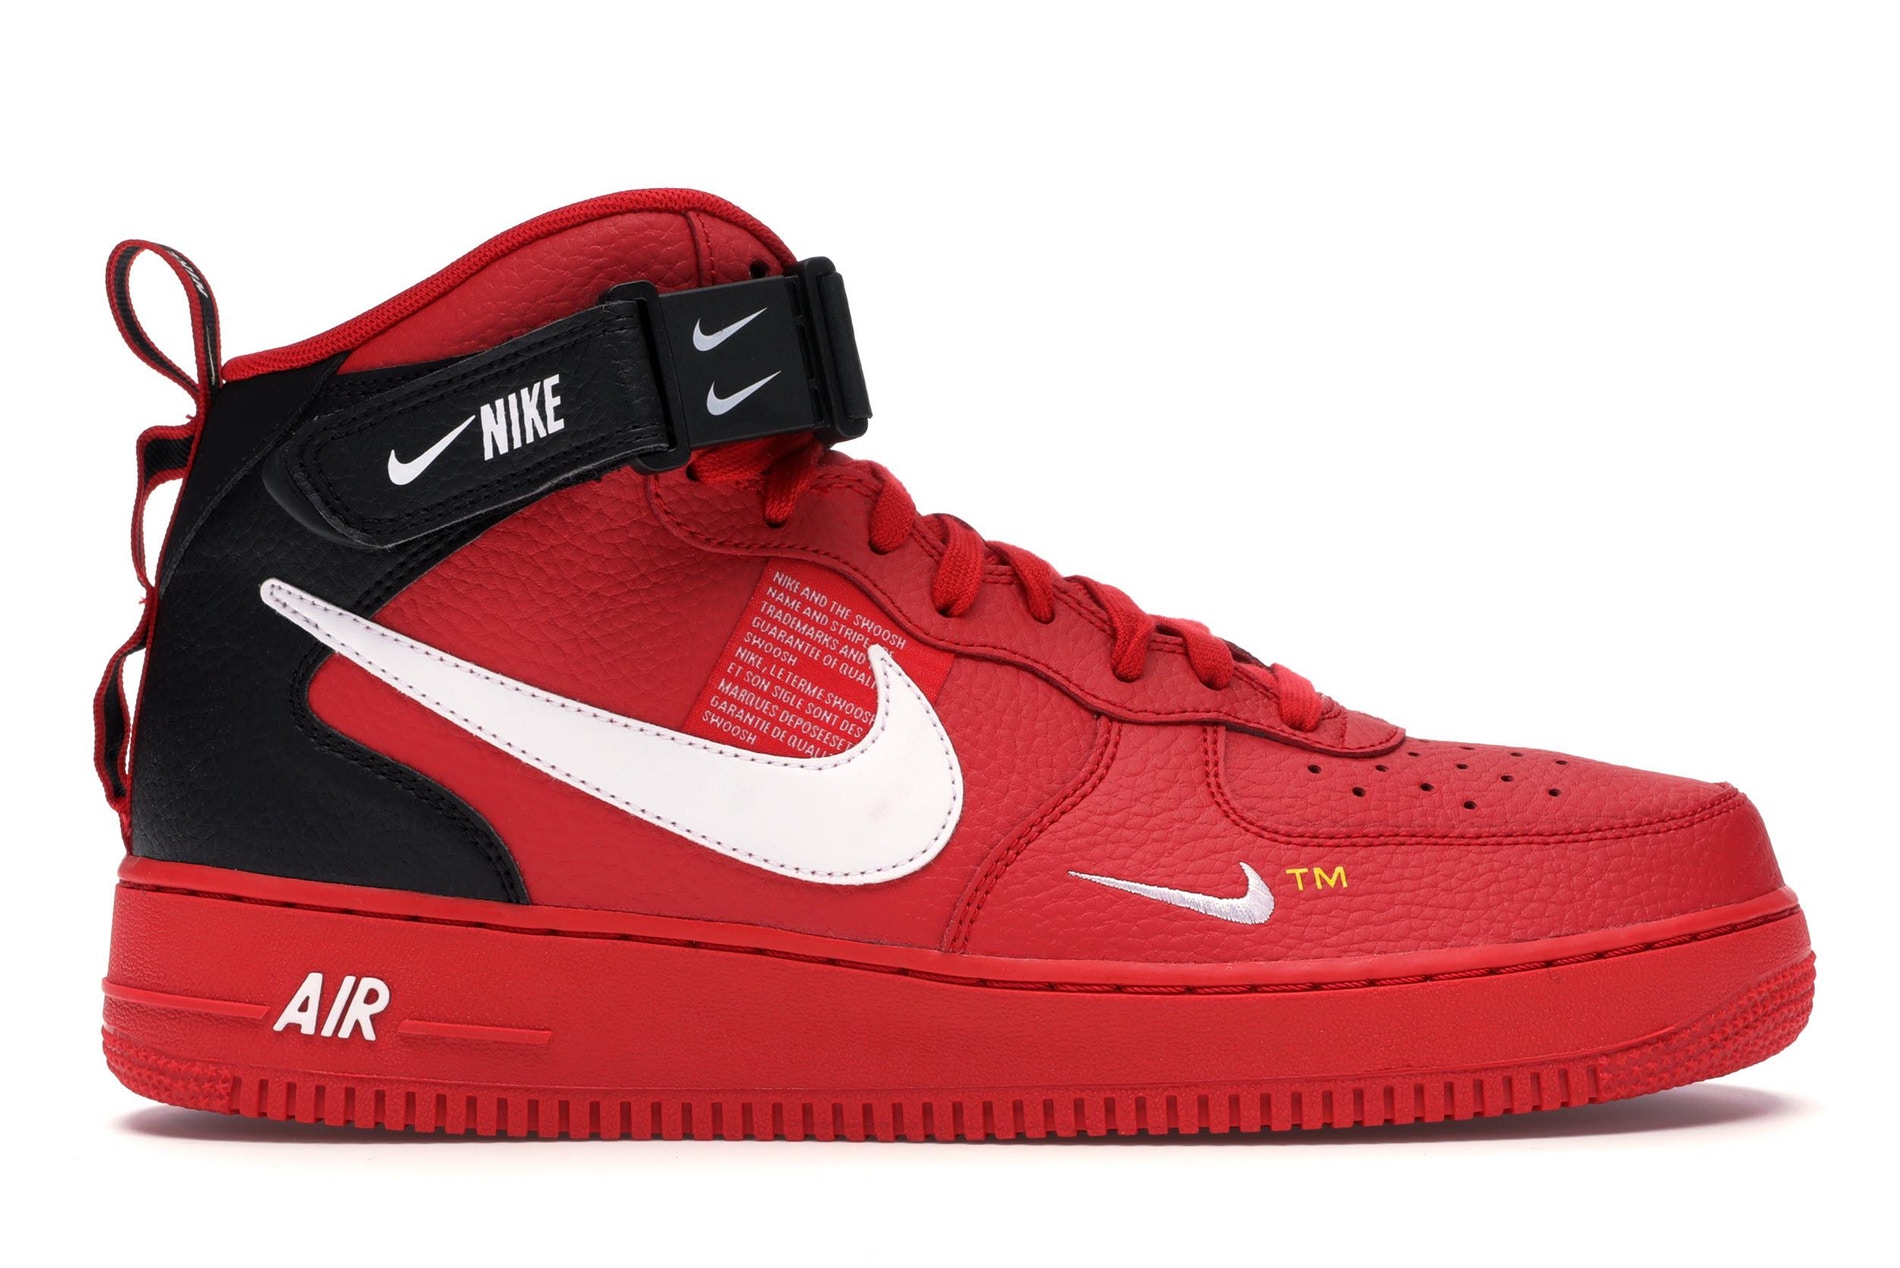 Nike Air Force 1 07 Mid lv8 Red